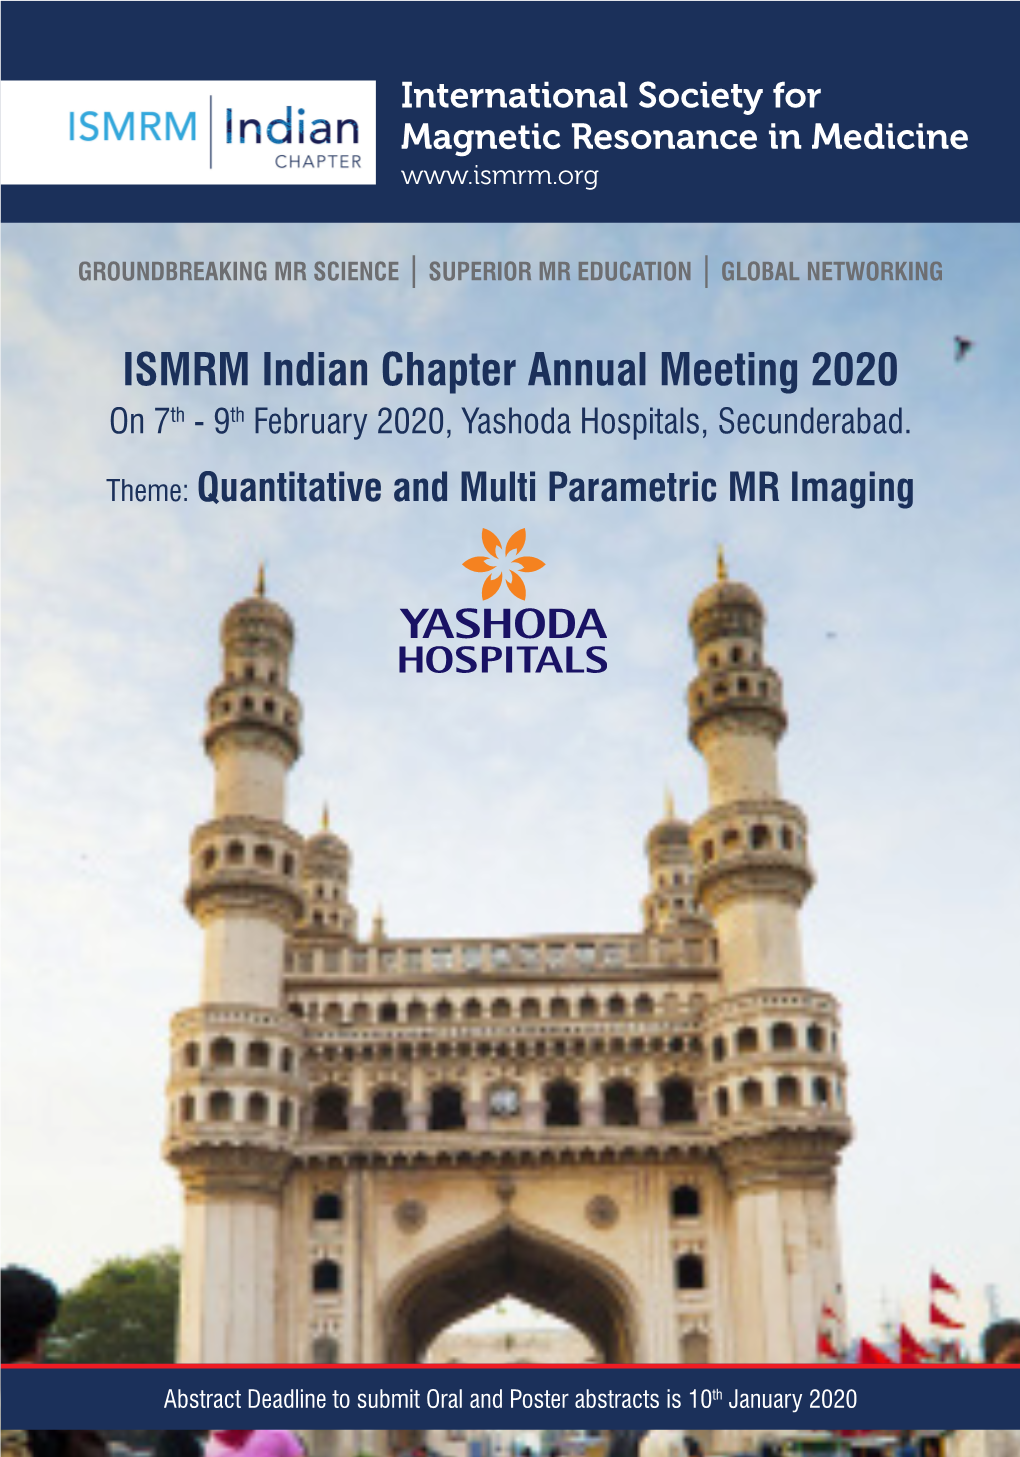 ISMRM Indian Chapter Annual Meeting 2020 on 7Th - 9Th February 2020, Yashoda Hospitals, Secunderabad